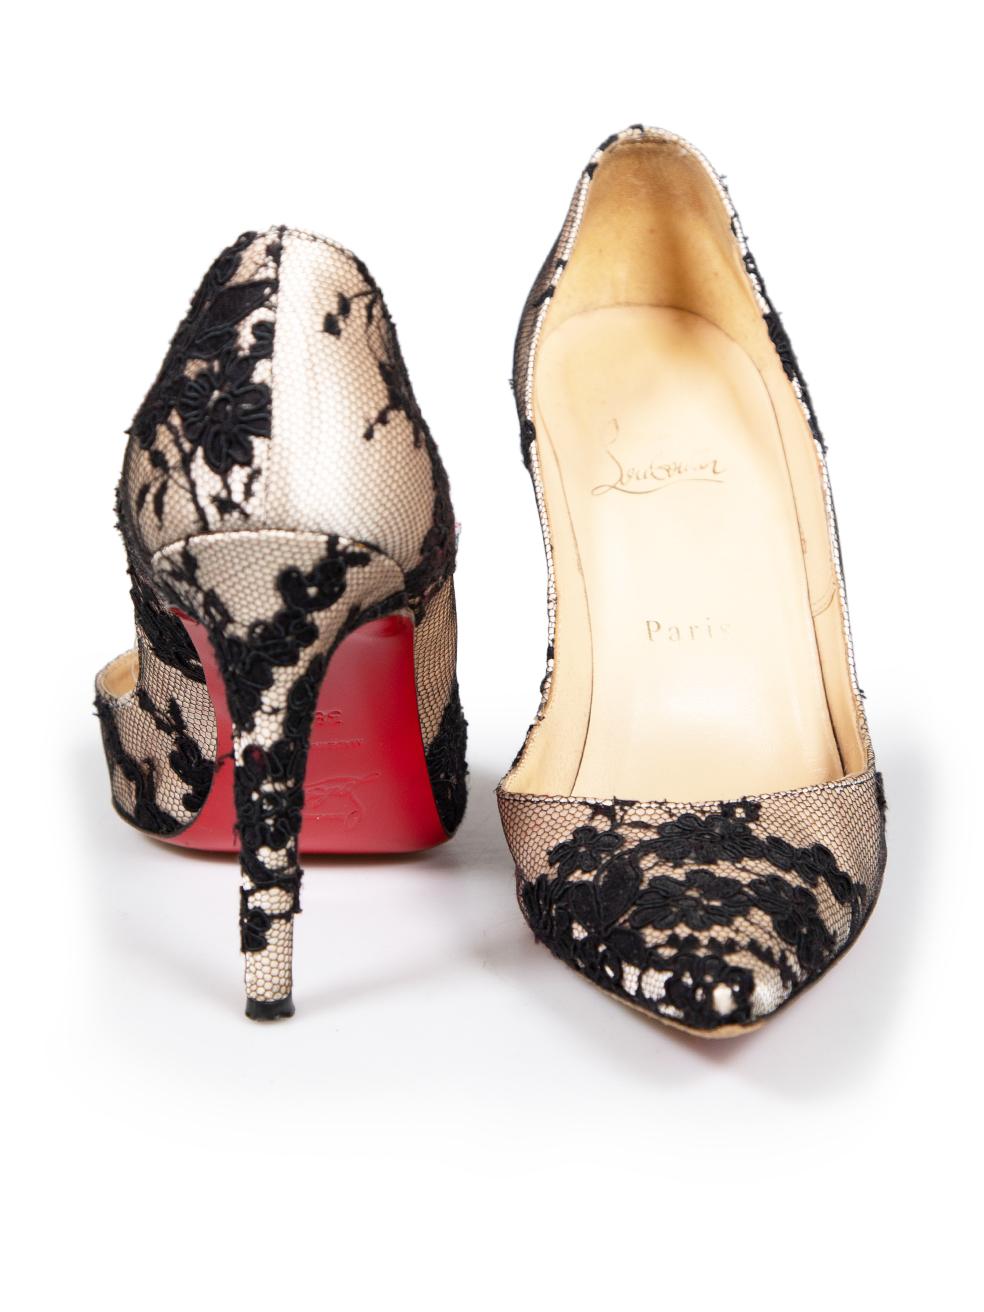 Christian Louboutin Black Lace Pigalle 120 Heels Size IT 38.5 In Good Condition For Sale In London, GB